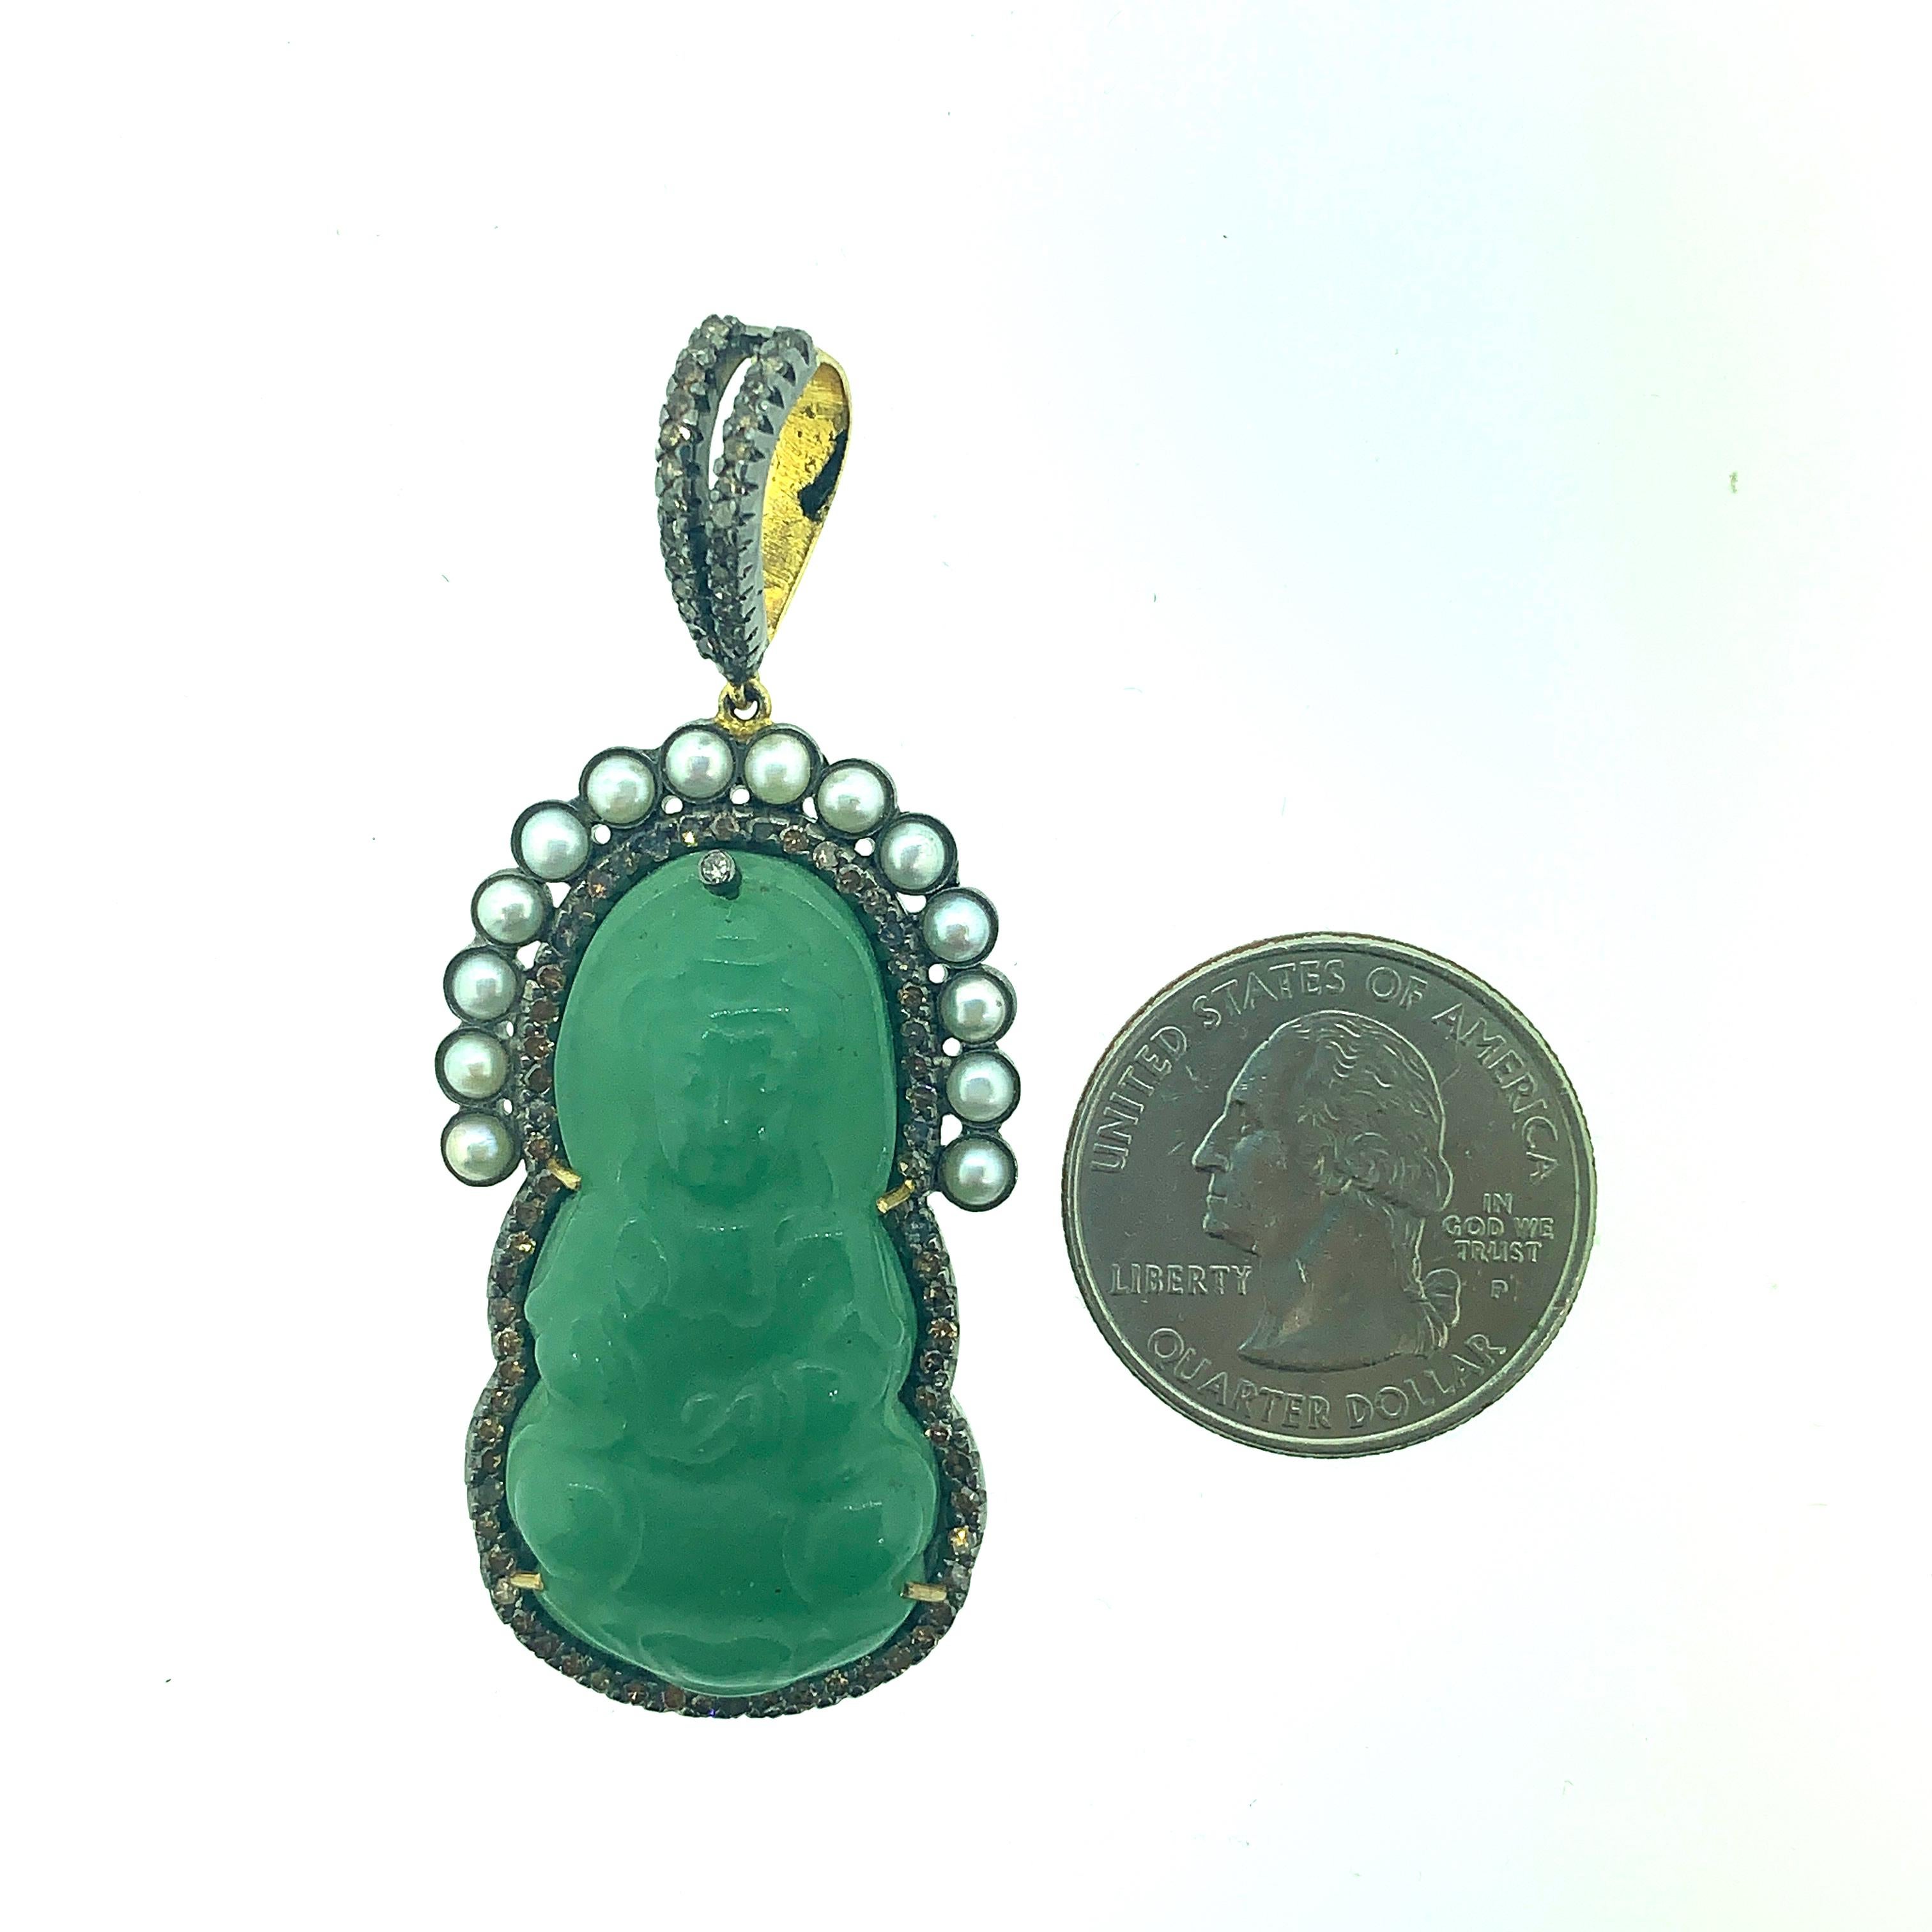 2.5 Inch Long Buddha in 39.90 ct Aventurine, 1.75 ct Pearl and 1.20 ct Diamond Pendant set in Oxidized Sterling Silver with 14K Gold back of bail and prongs. The pearls are set on the aventurine Buddha in the form of a crown and the jade is